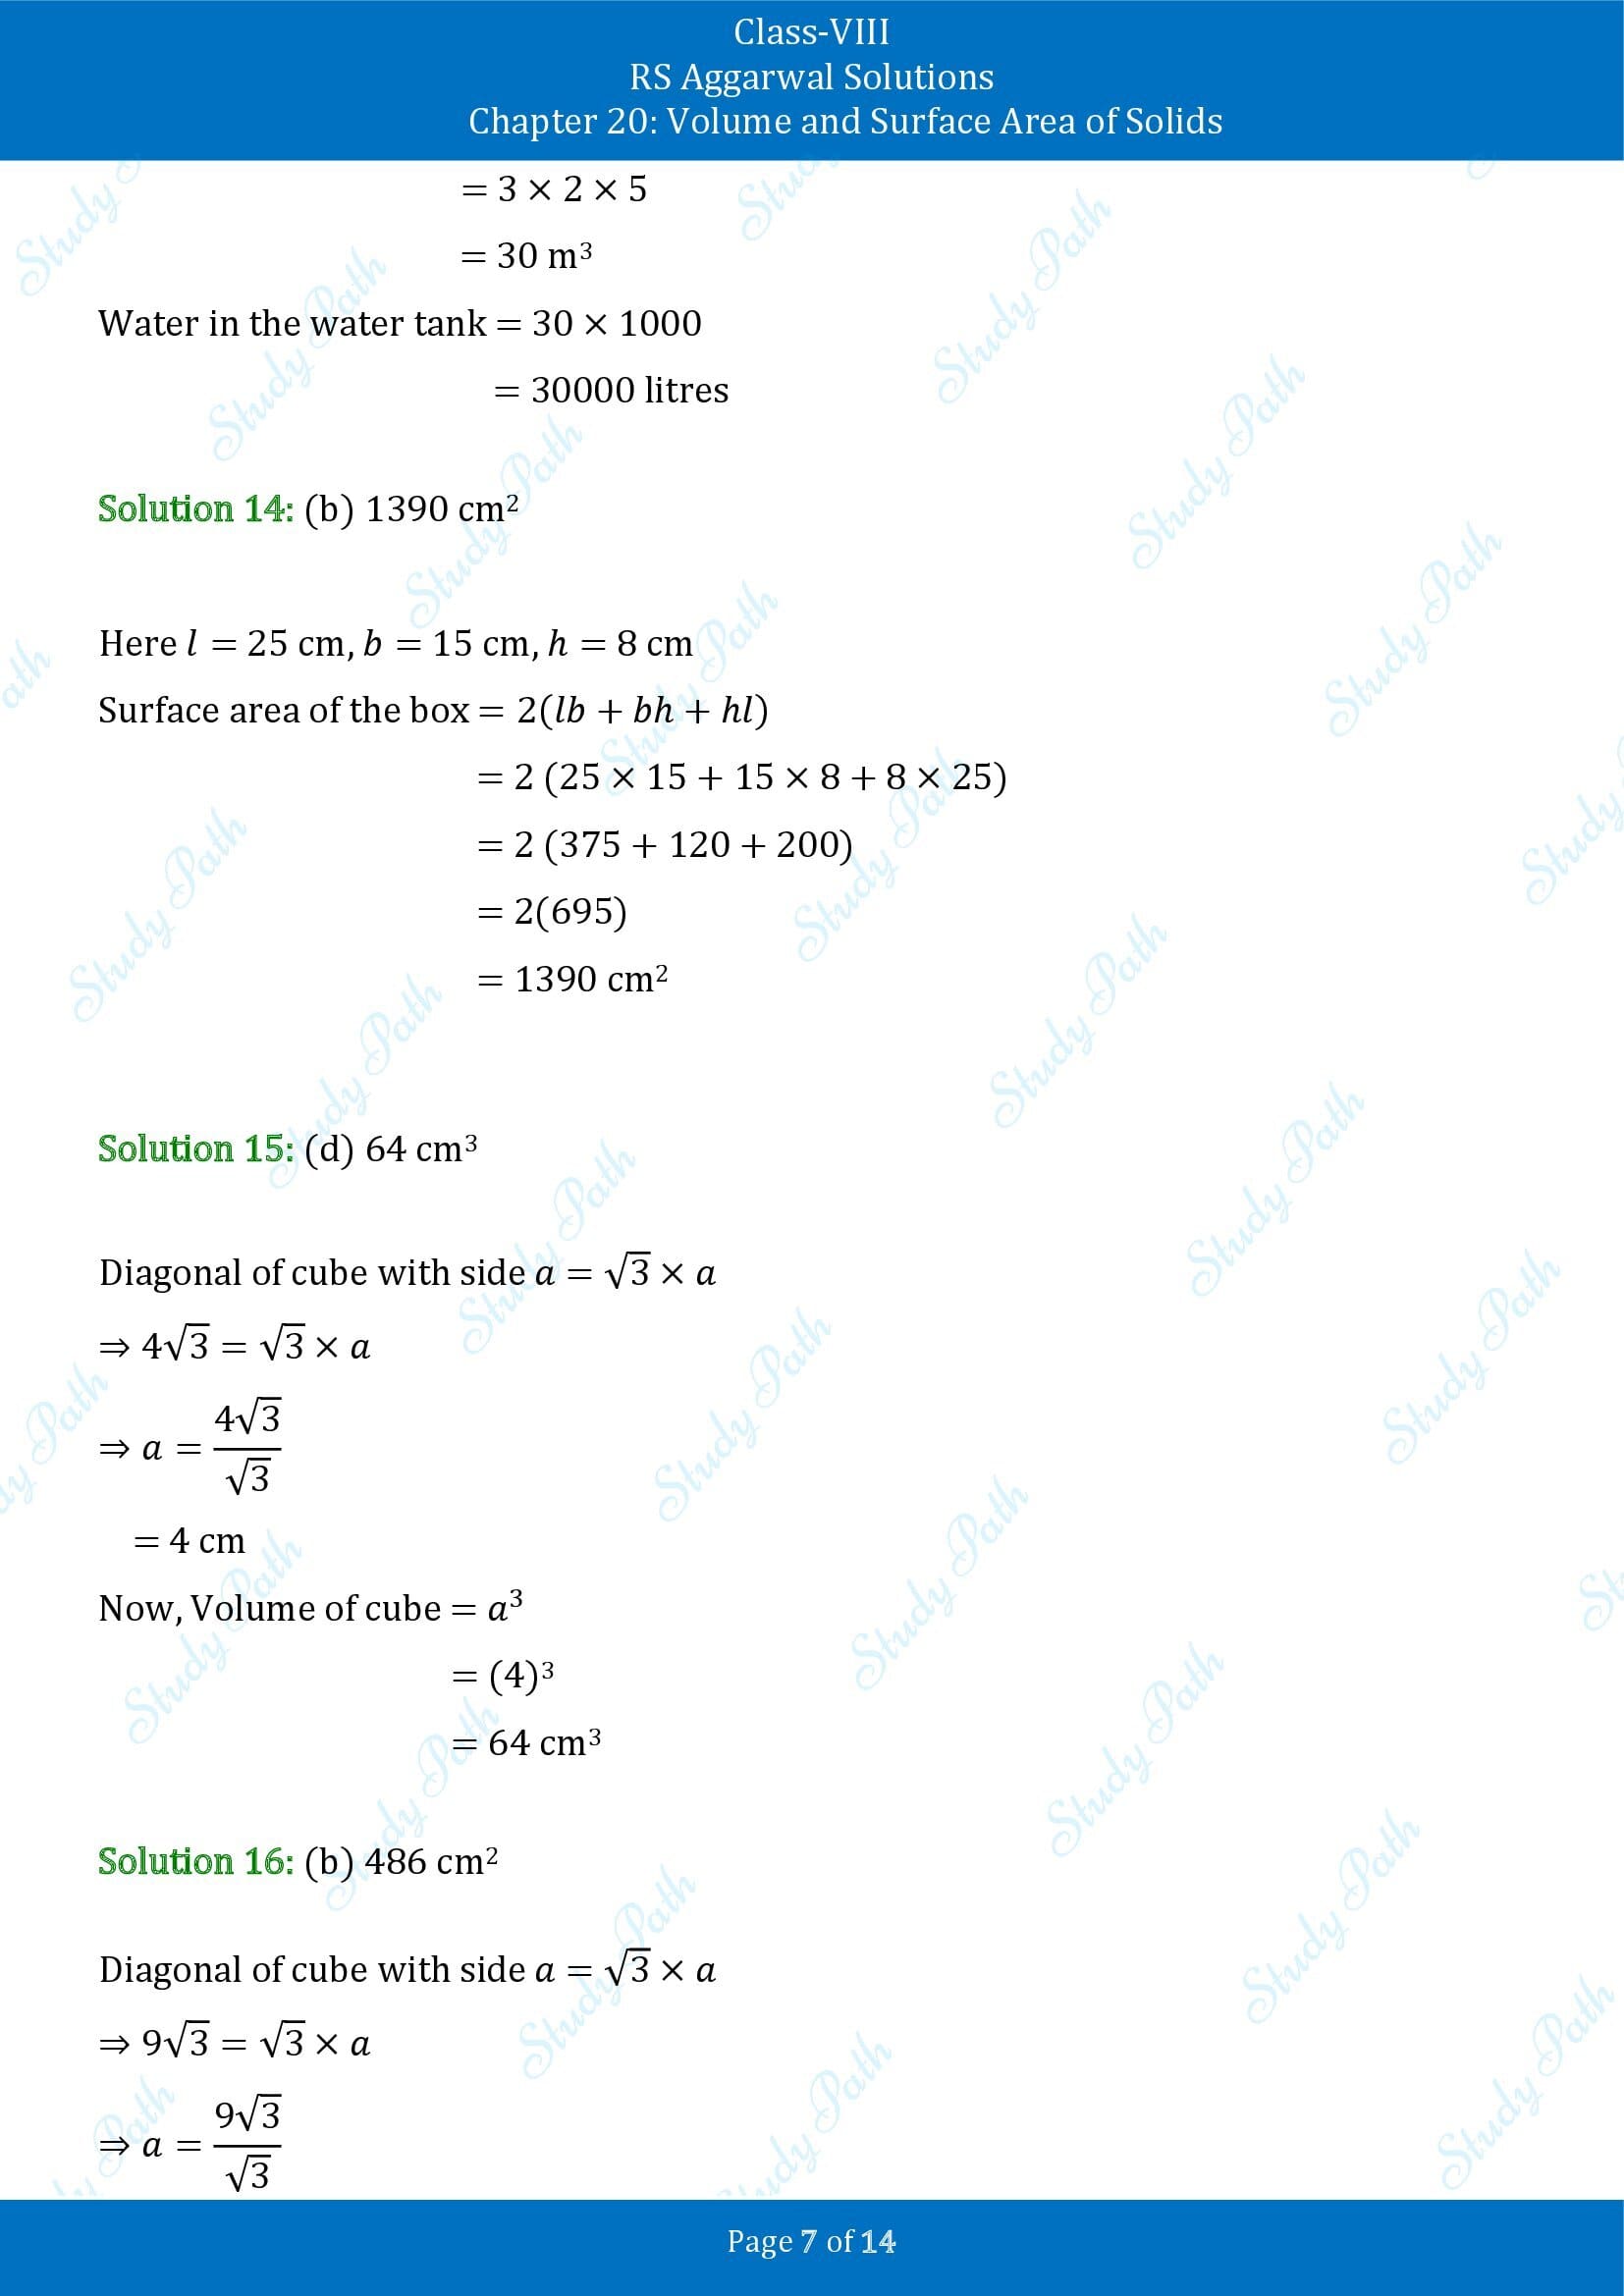 RS Aggarwal Solutions Class 8 Chapter 20 Volume and Surface Area of Solids Exercise 20C MCQs 00007